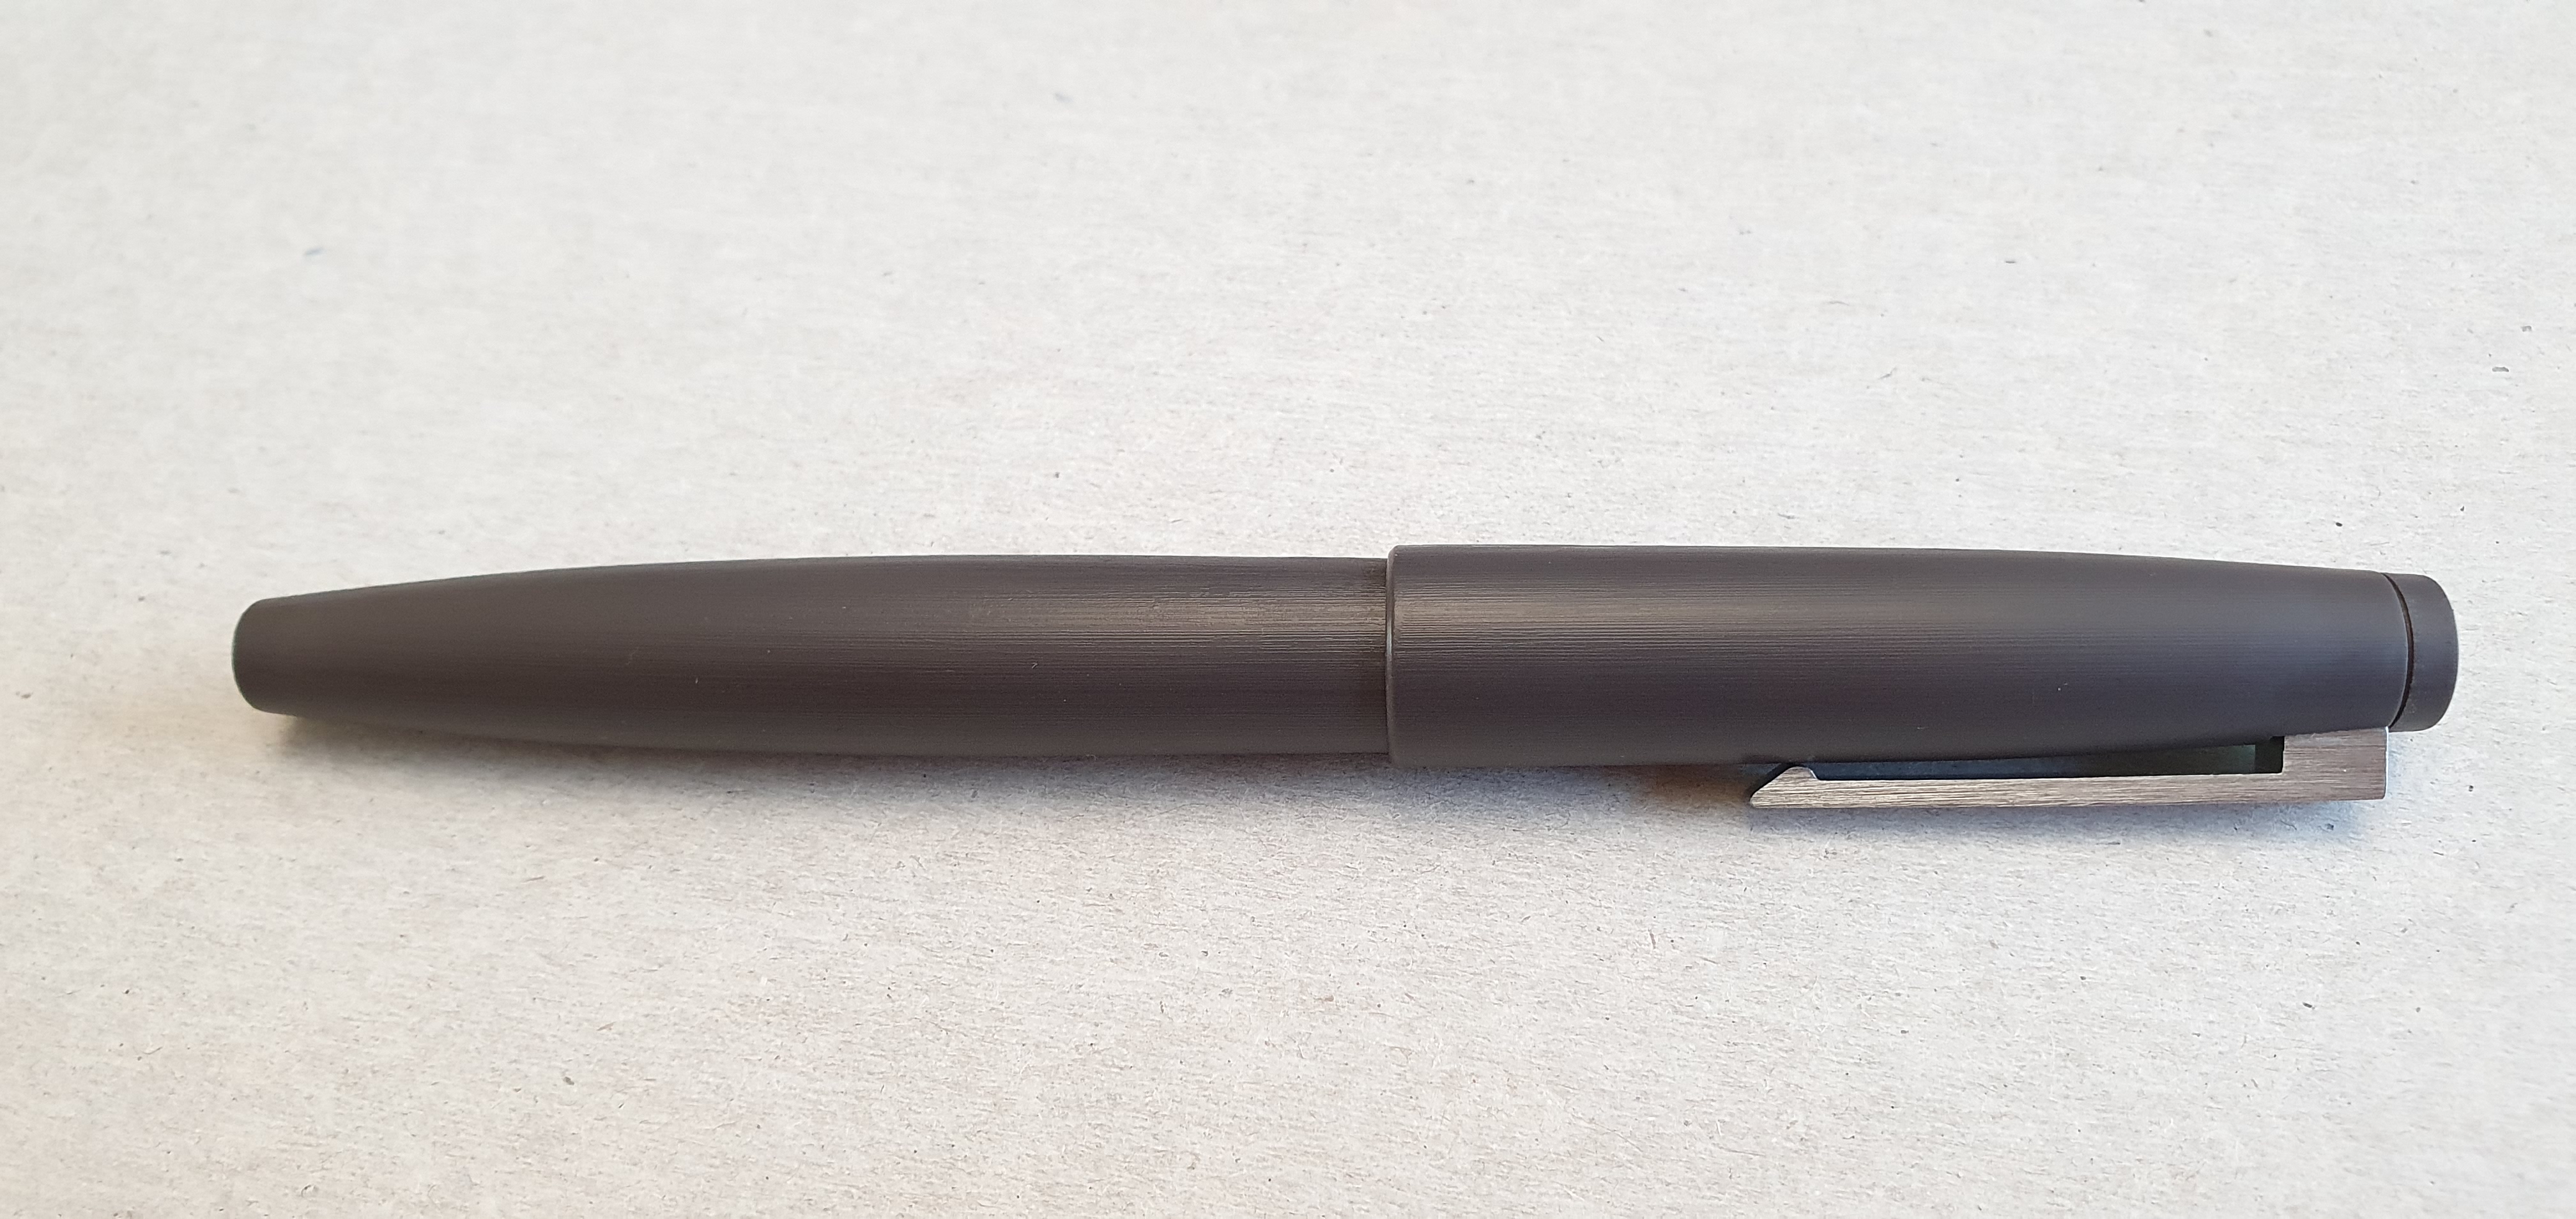 Comparing Four Metal Body Pens to Replace my Pilot G2s: Parker